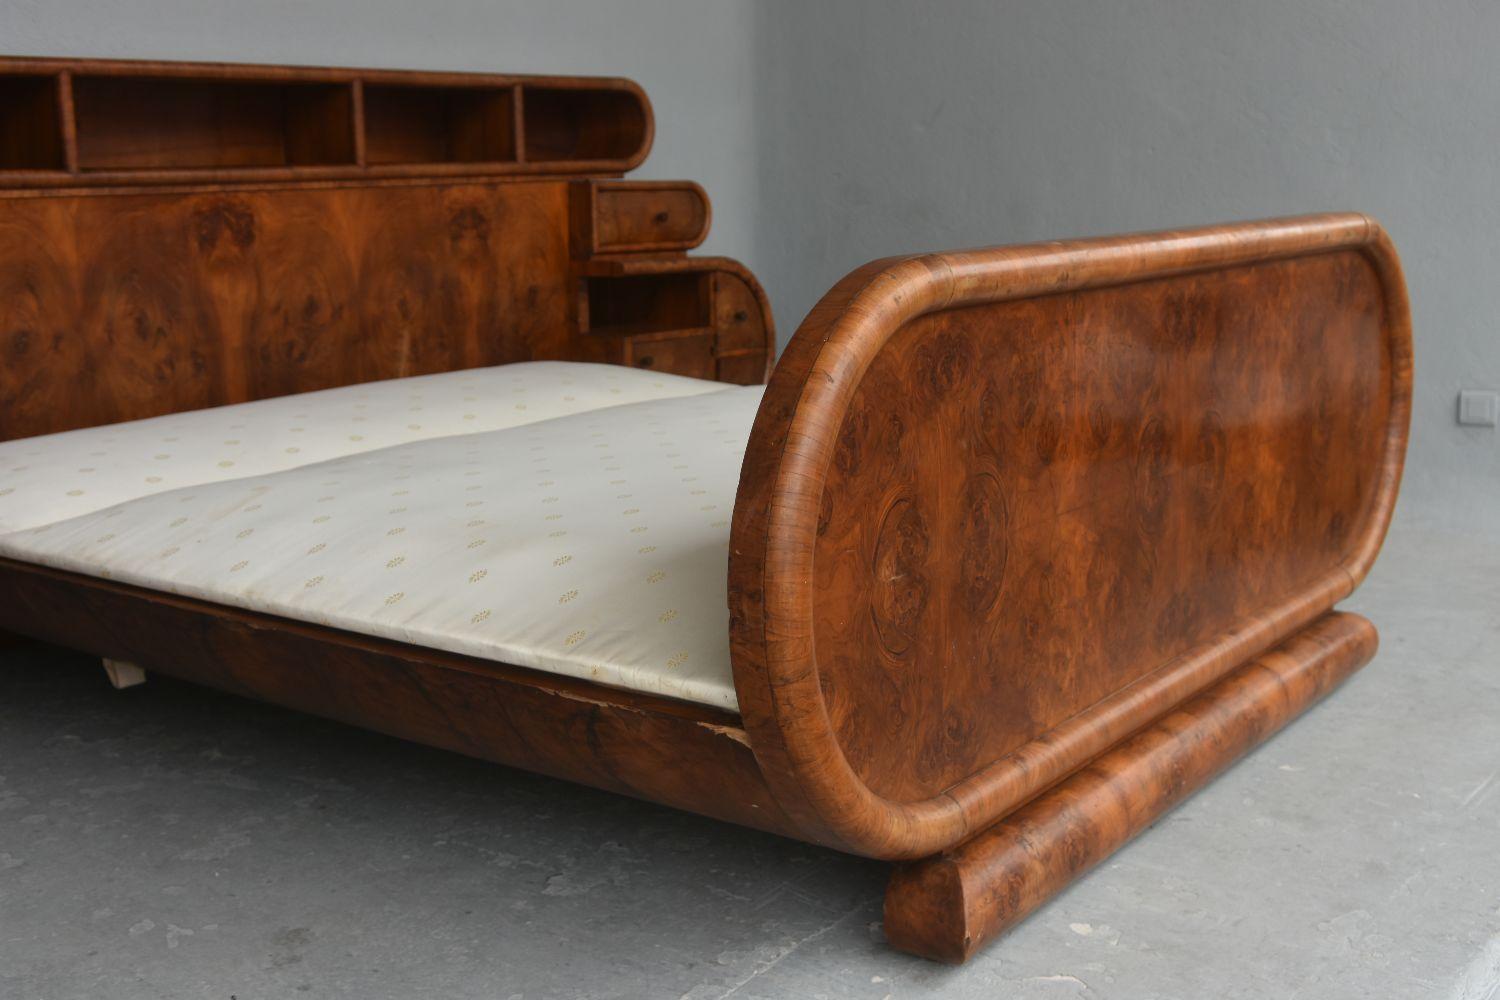 Italian 1930s Art Deco Hollywood Bed in Walnut Burl Veneer with its Curved